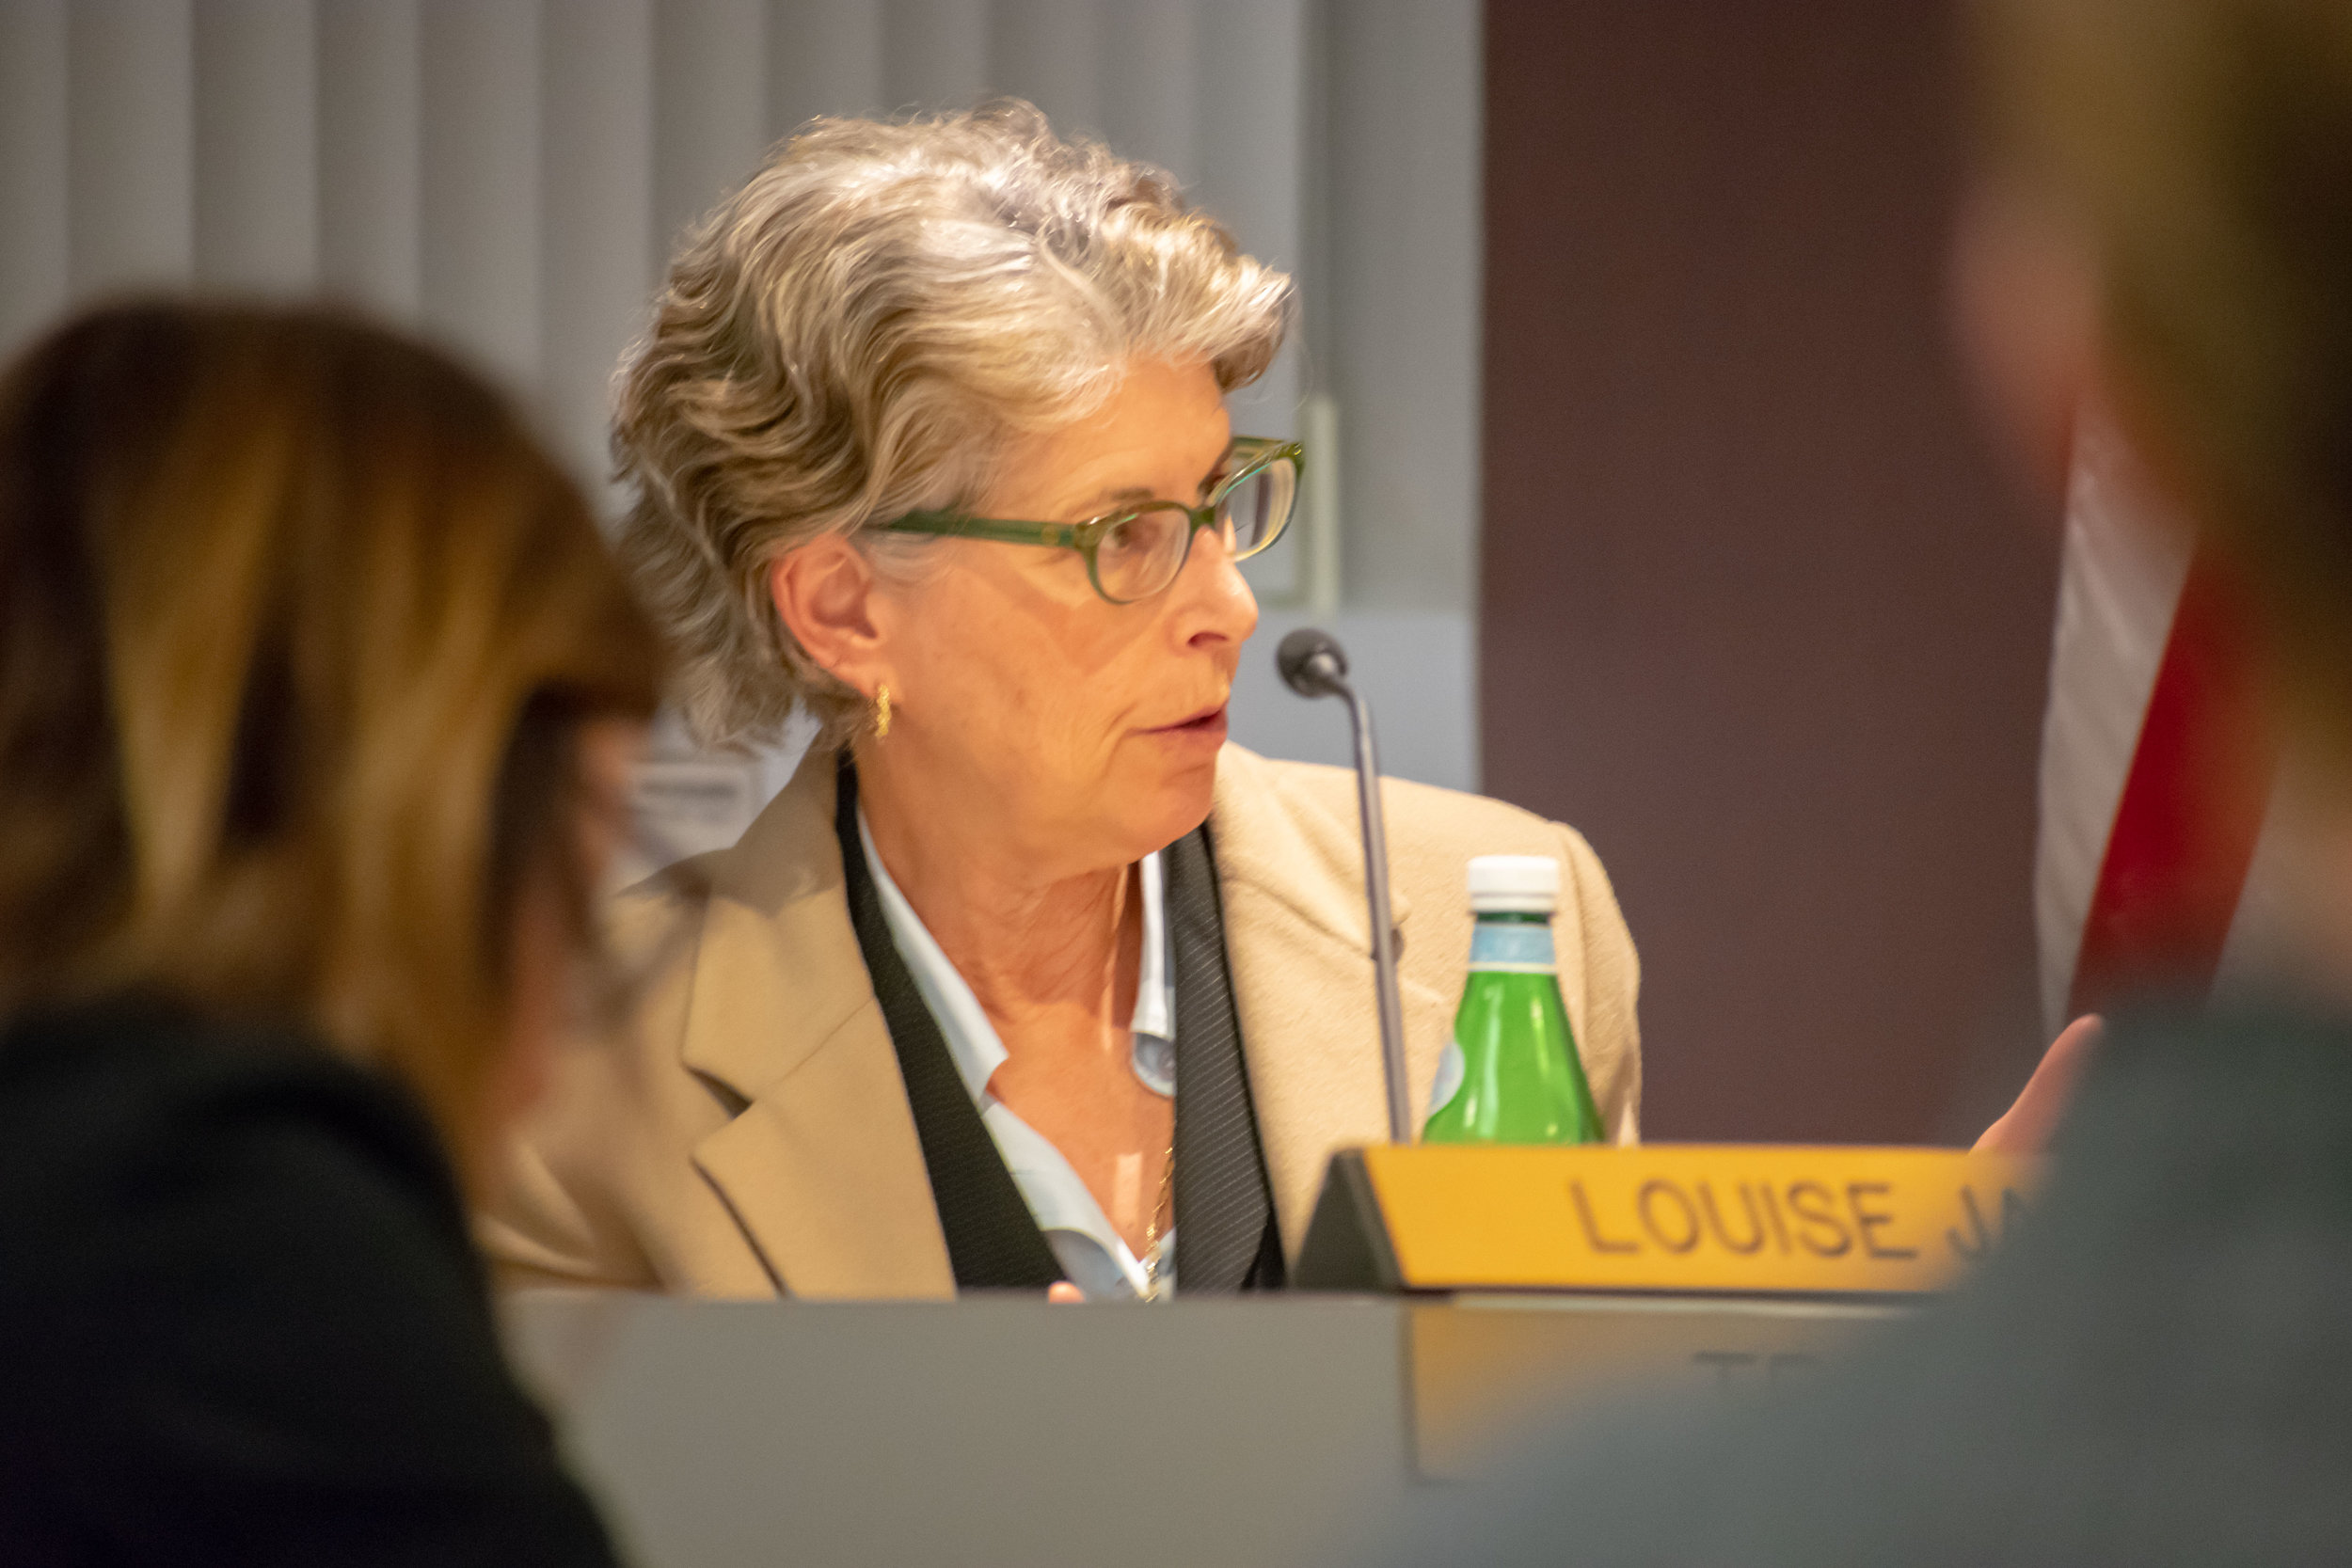  Dr. Louise Jaffe sits on the Santa Monica College board of trustees during their meeting on Tuesday, May 1 and watches a presentation on the status of enrollment at the college in Santa Monica, California. Jaffe has been on the board since 2006 and 